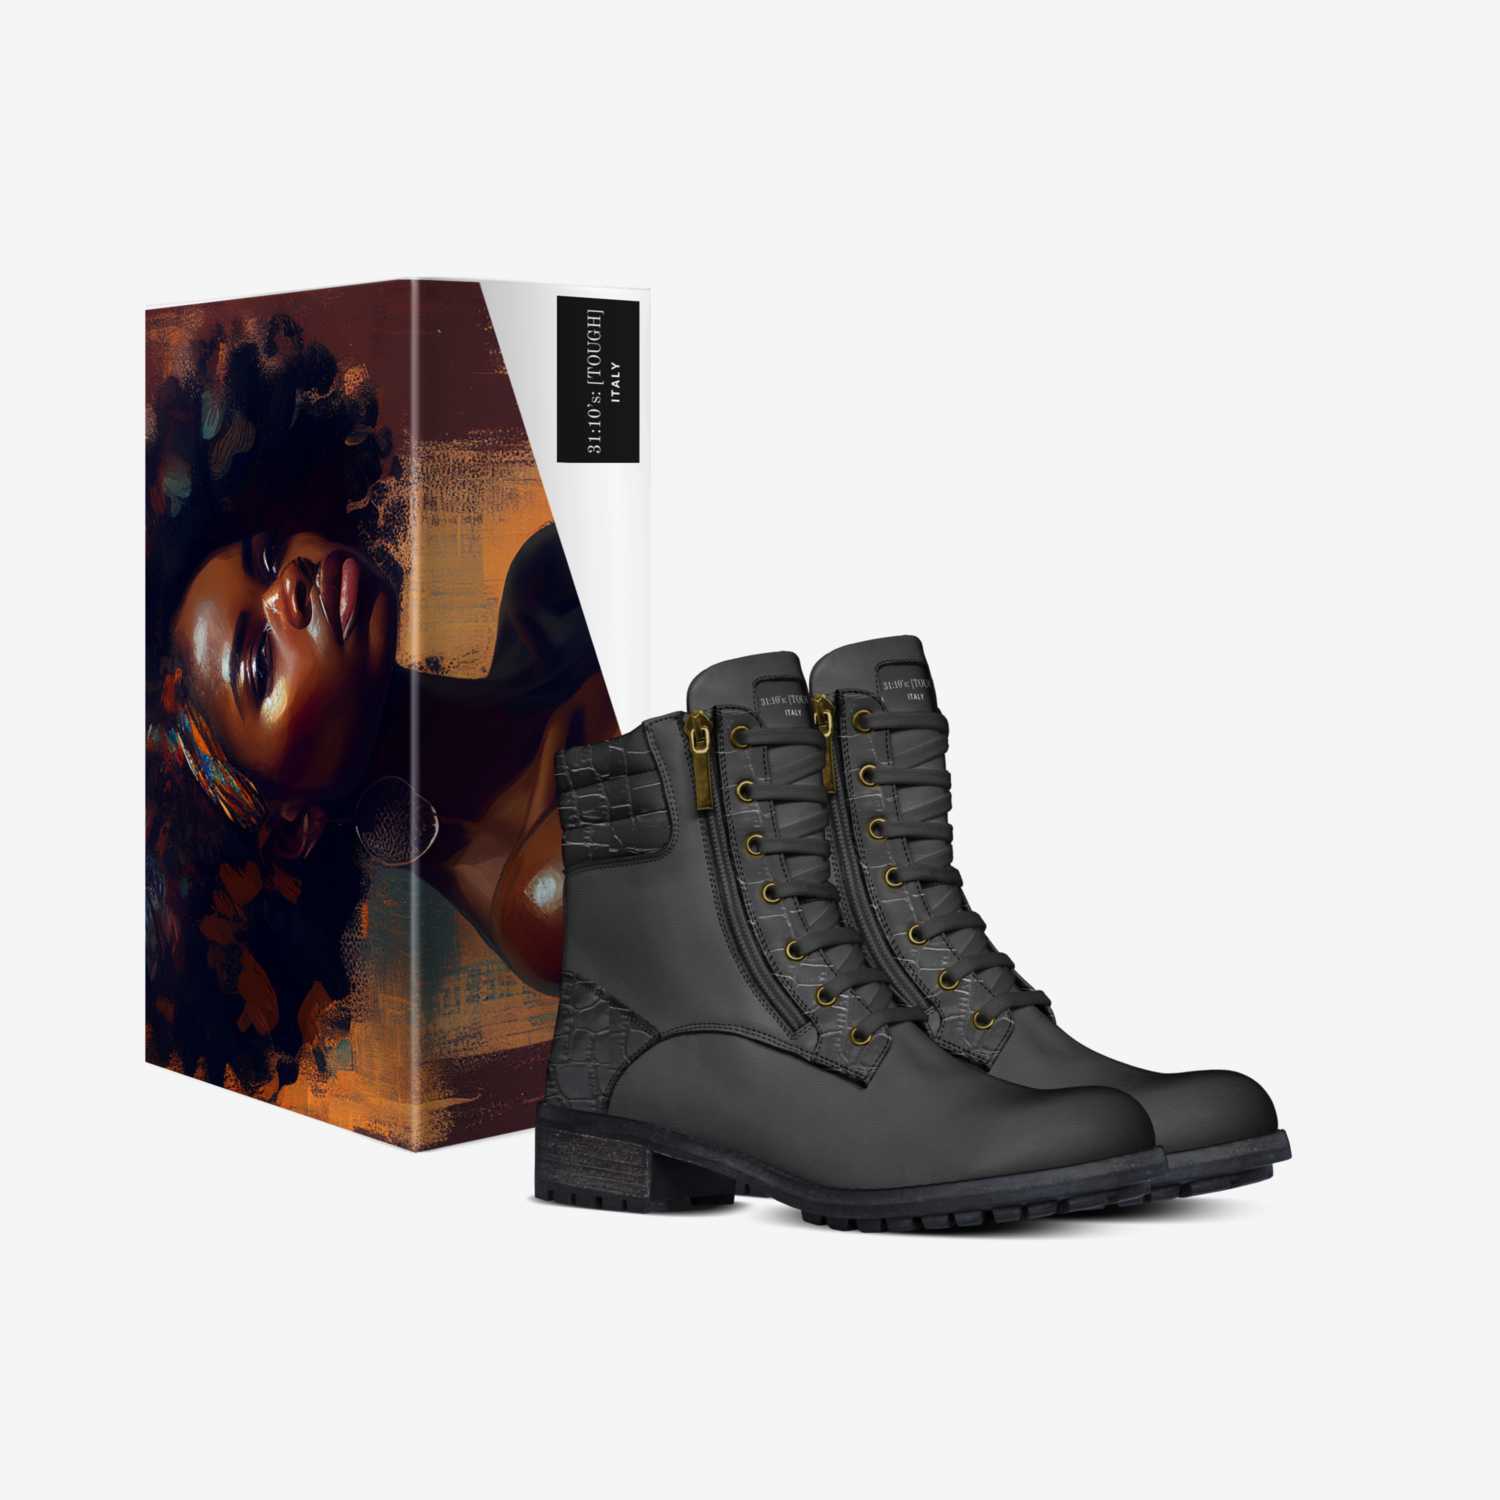 31:10's: [TOUGH] custom made in Italy shoes by Raymond Fidere Pittman | Box view